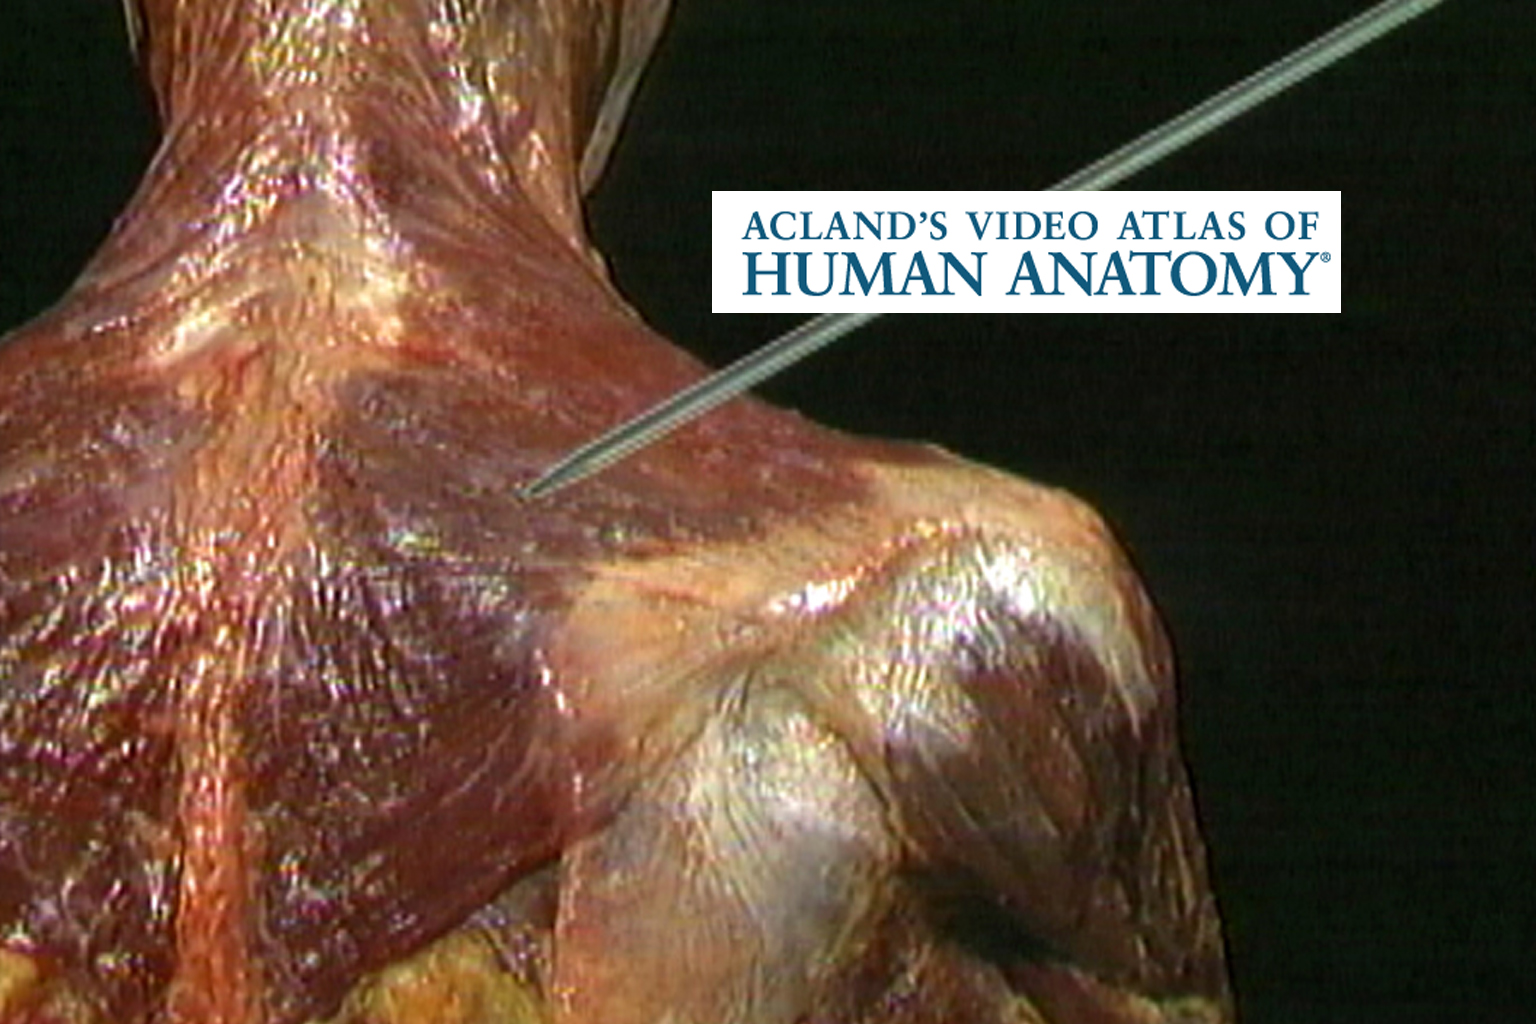 Illustration of shoulder muscles from Acland's video atlas of human anatomy